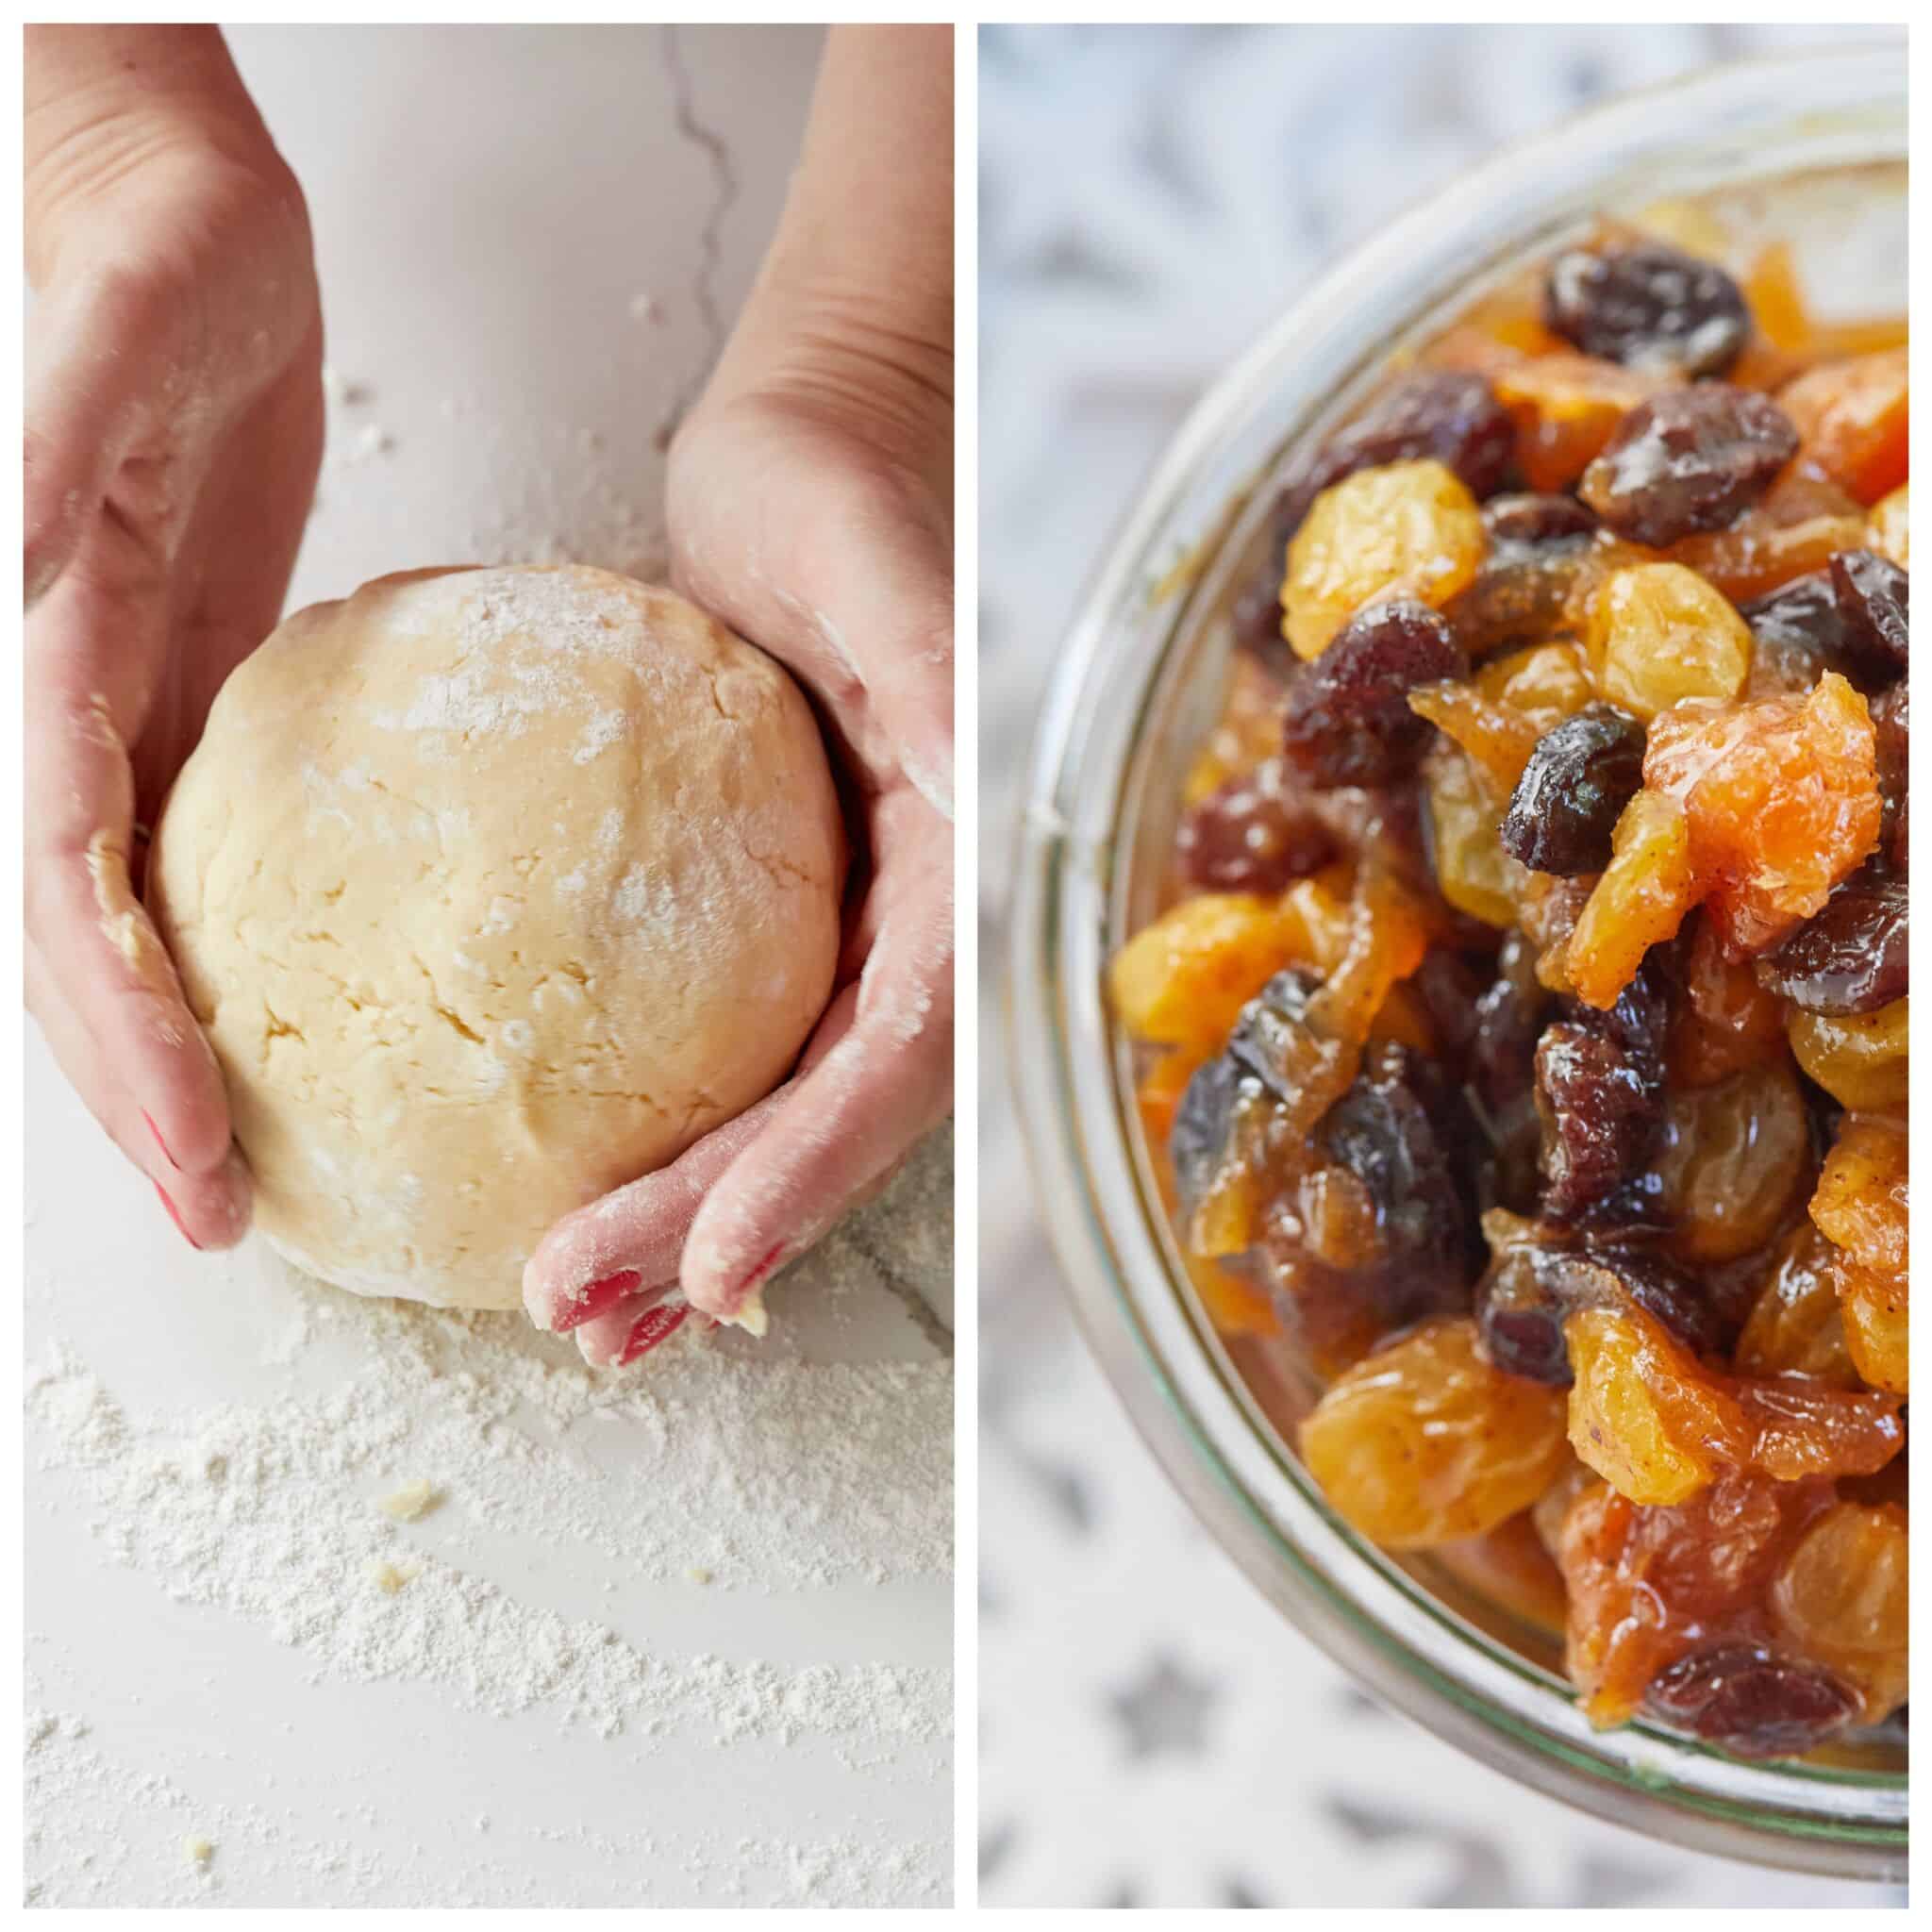 Step-by-step instructions on How to Make Traditional Irish Mince Pies: prepare the pie crust and mince meat separately.